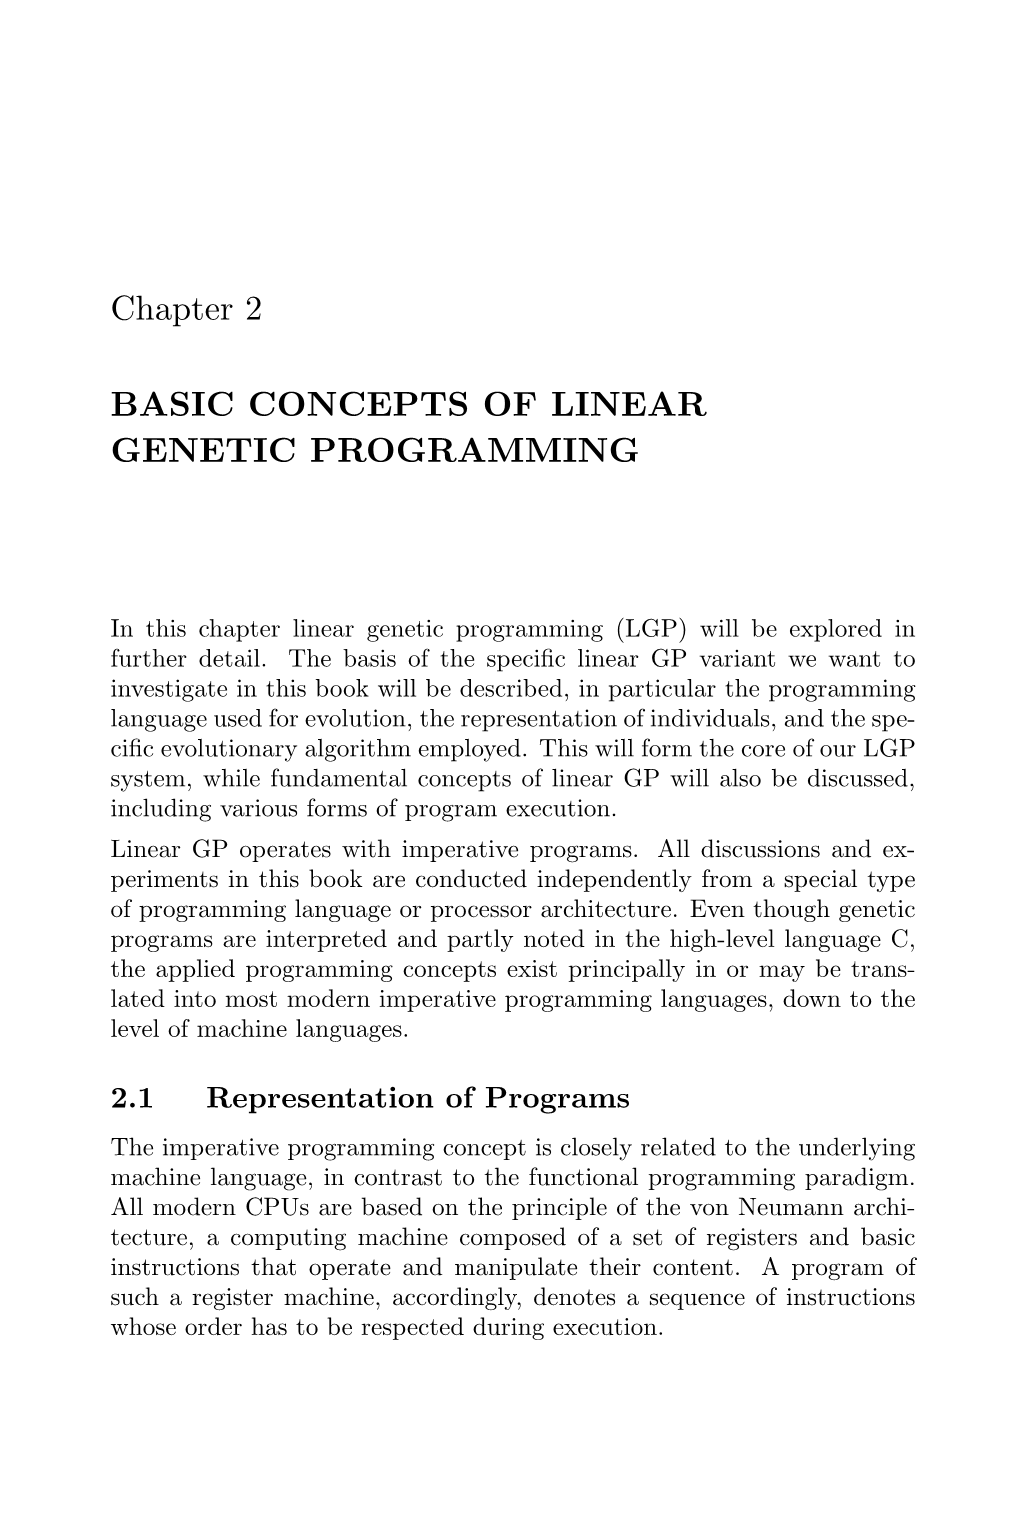 Basic Concepts of Linear Genetic Programming